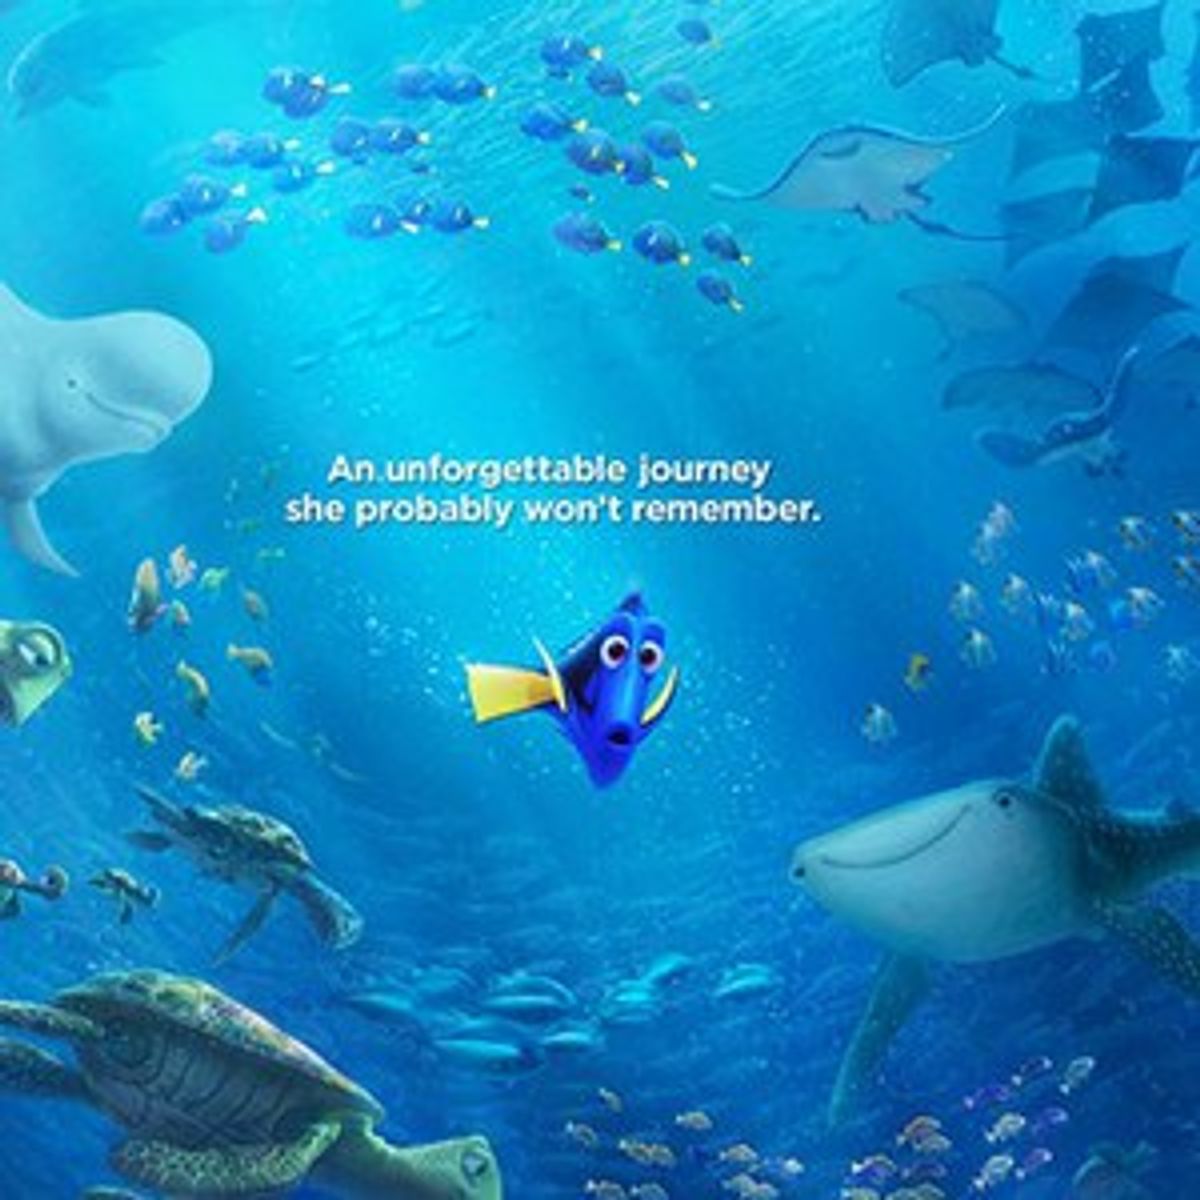 7 Reasons To Go See 'Finding Dory'